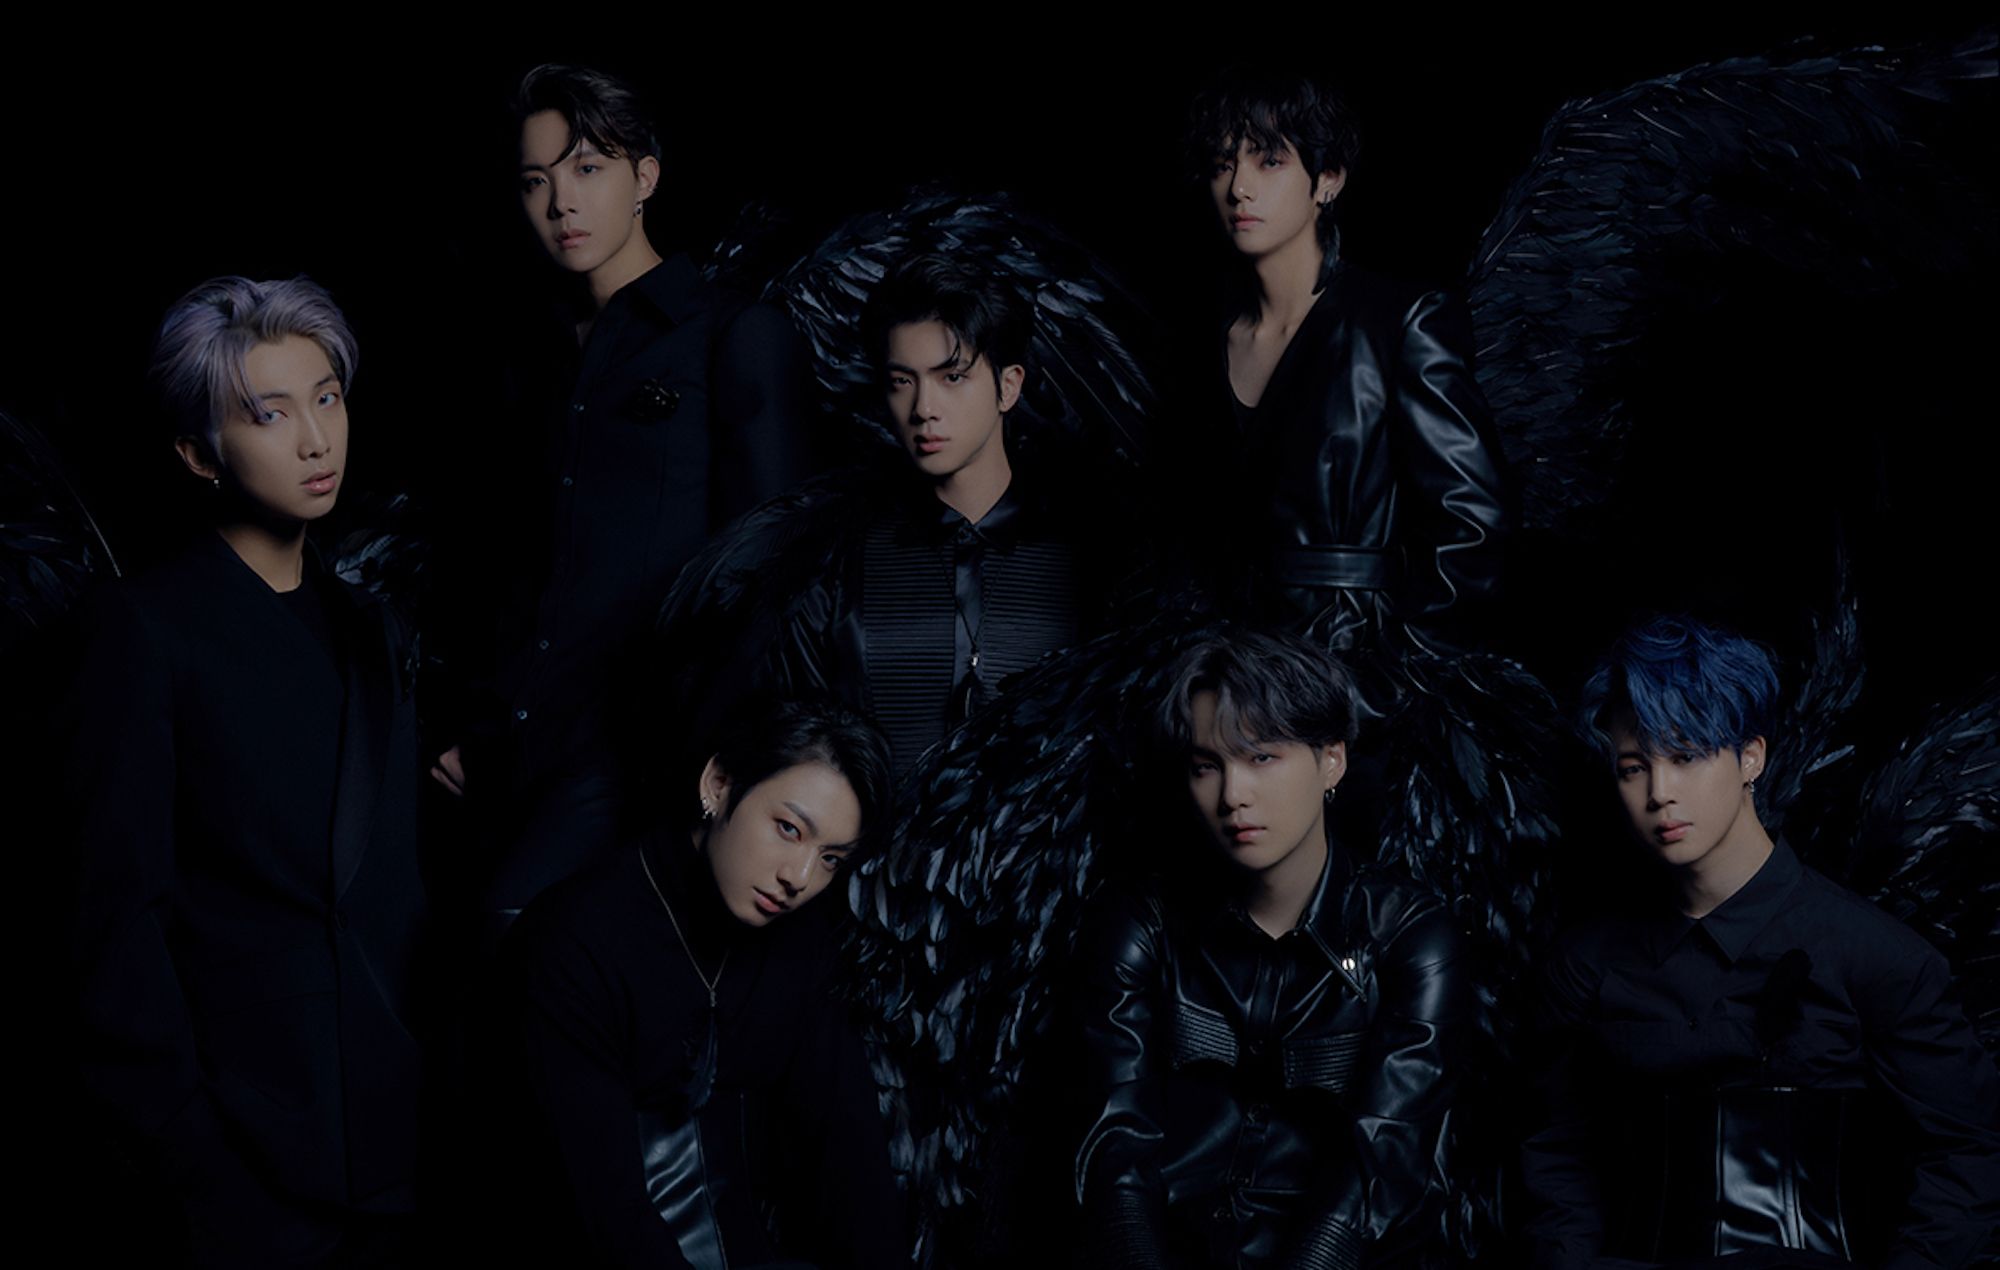 Watch BTS' mesmerising and shadowy new video for 'Black Swan'